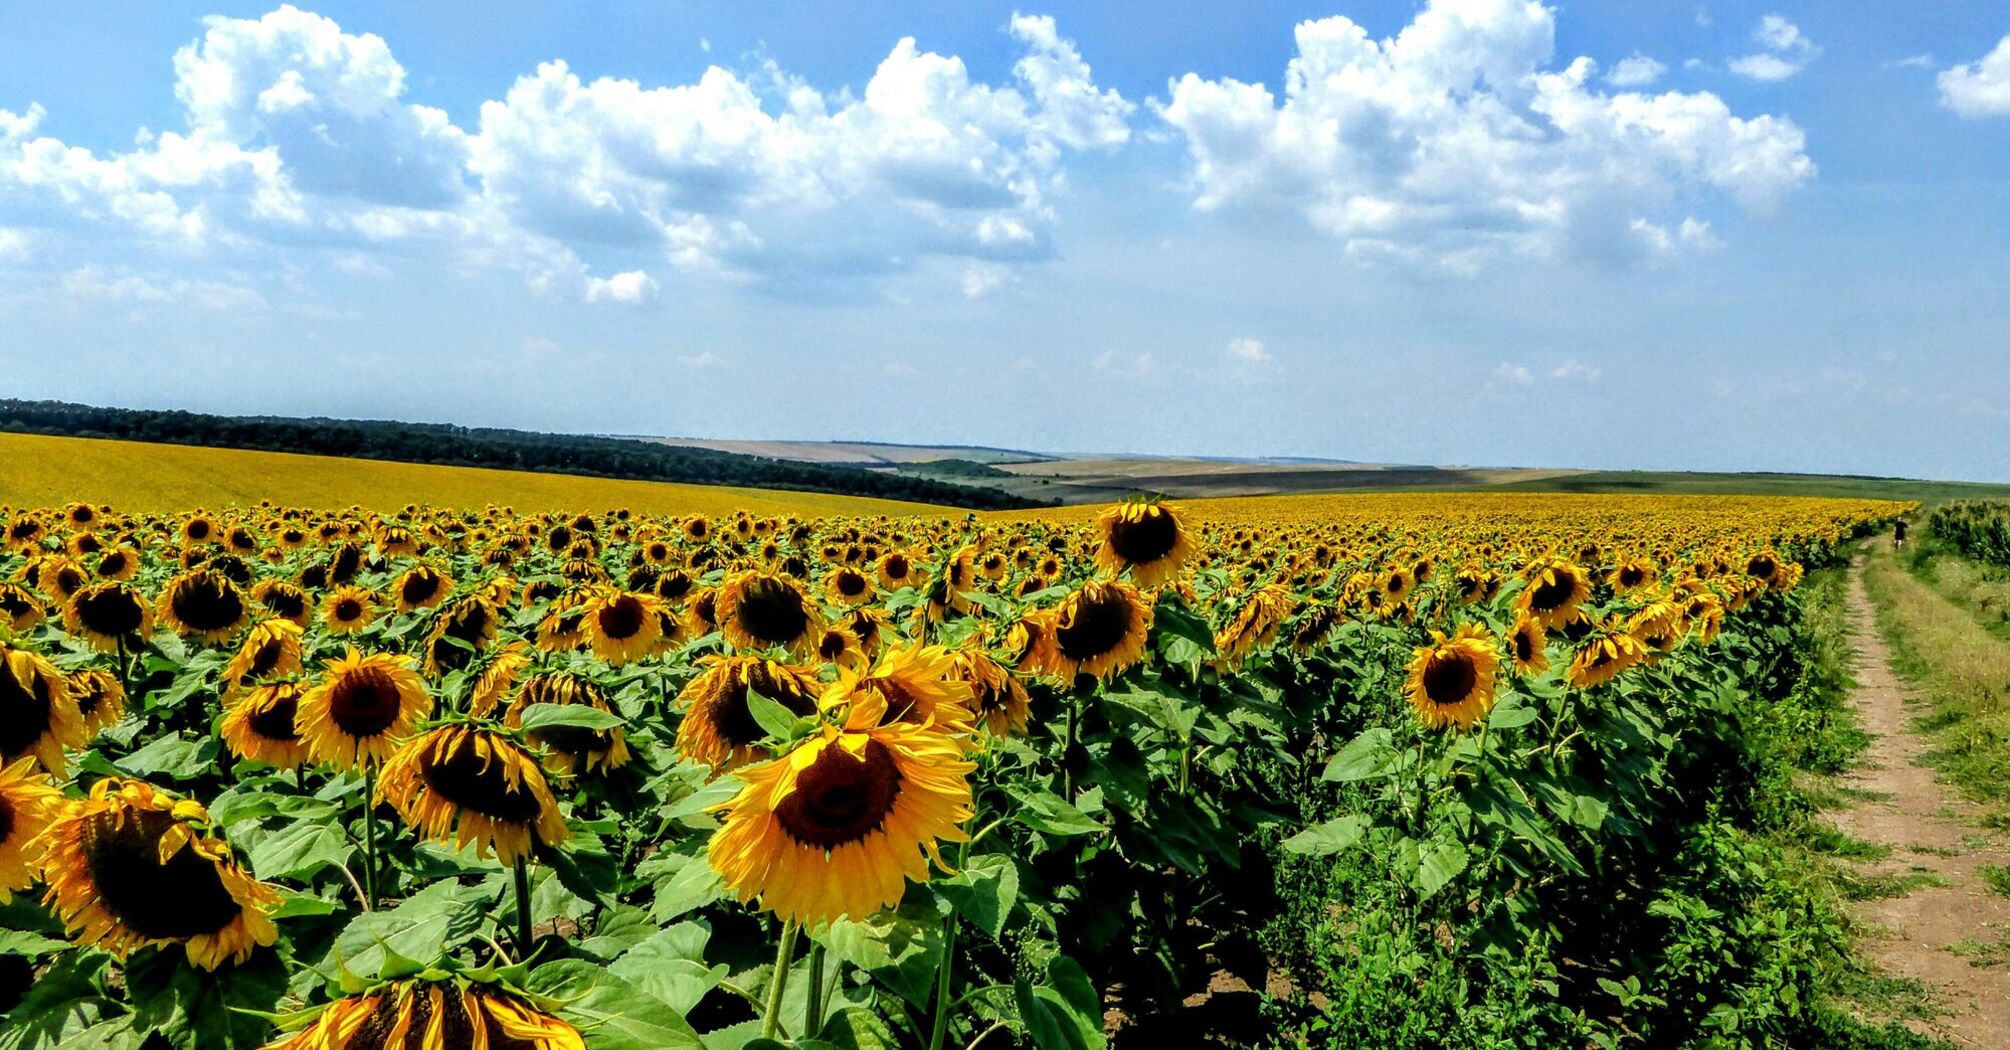 Rural Bulgaria, sunflowers in a small village